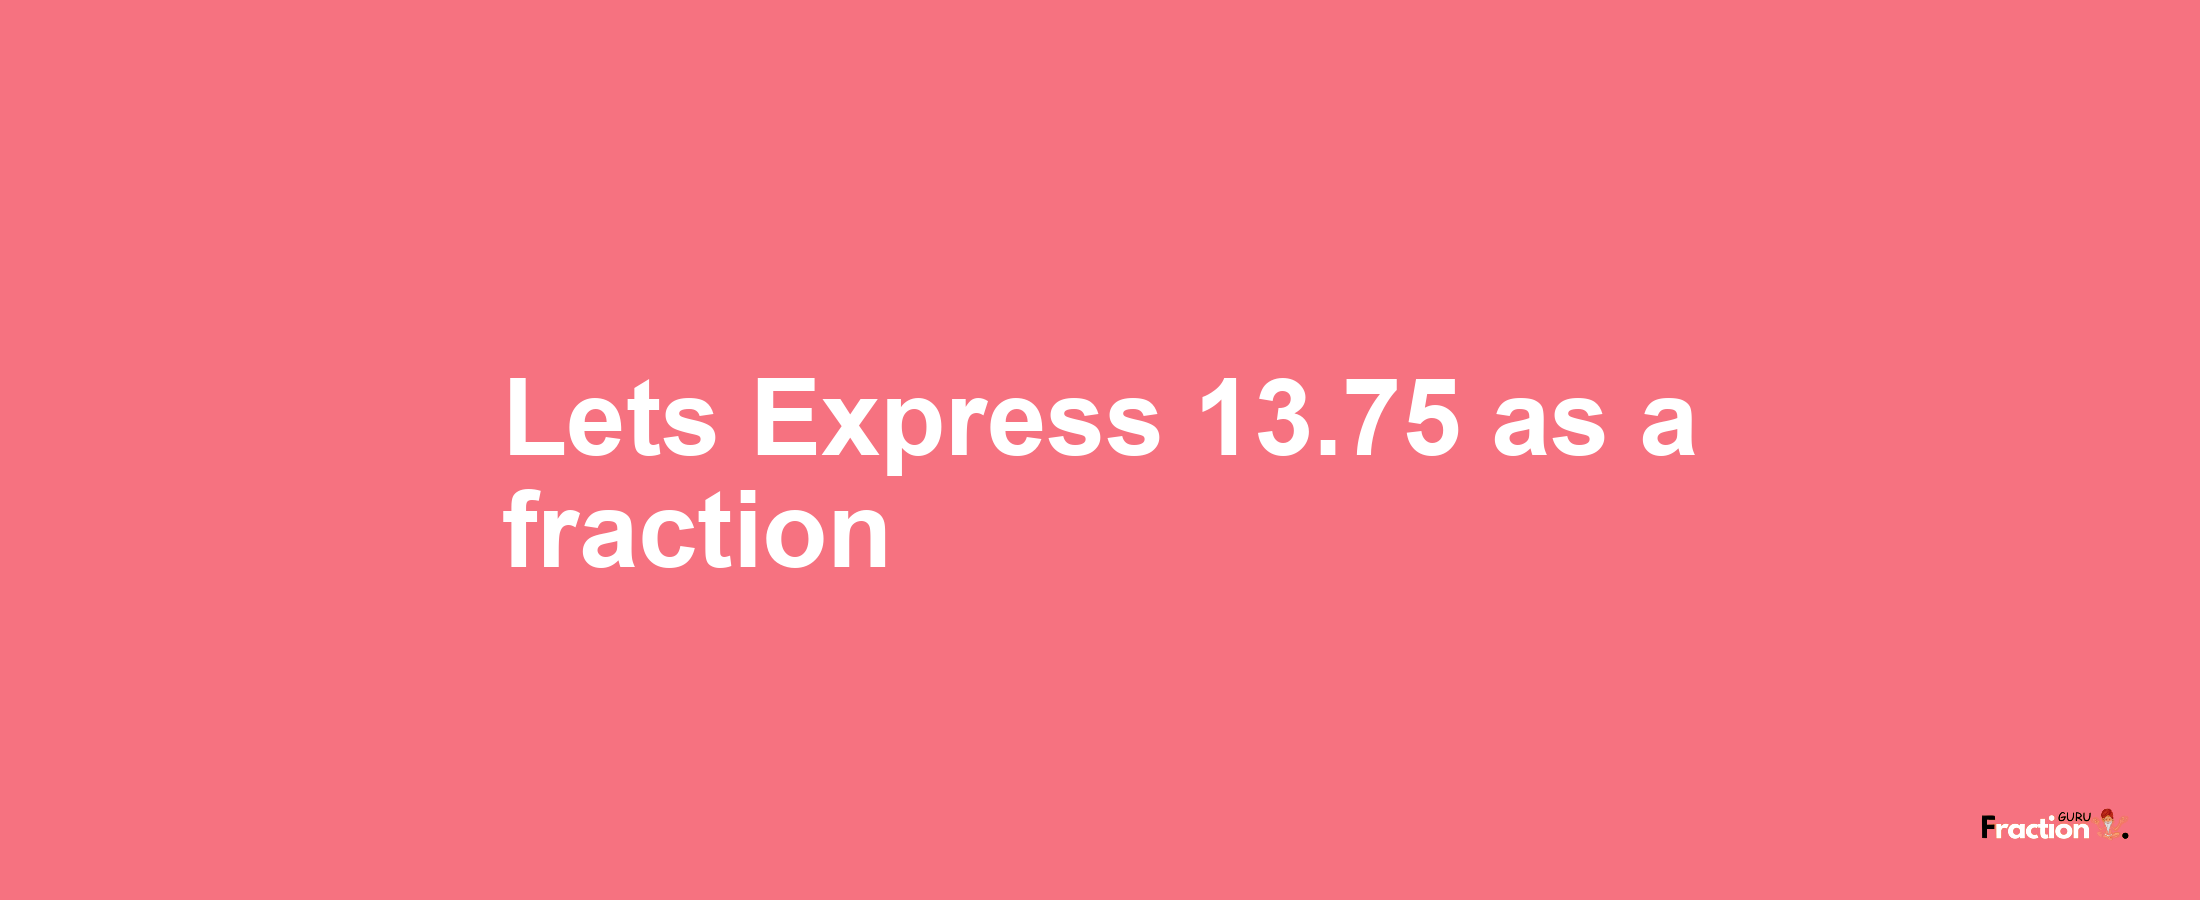 Lets Express 13.75 as afraction